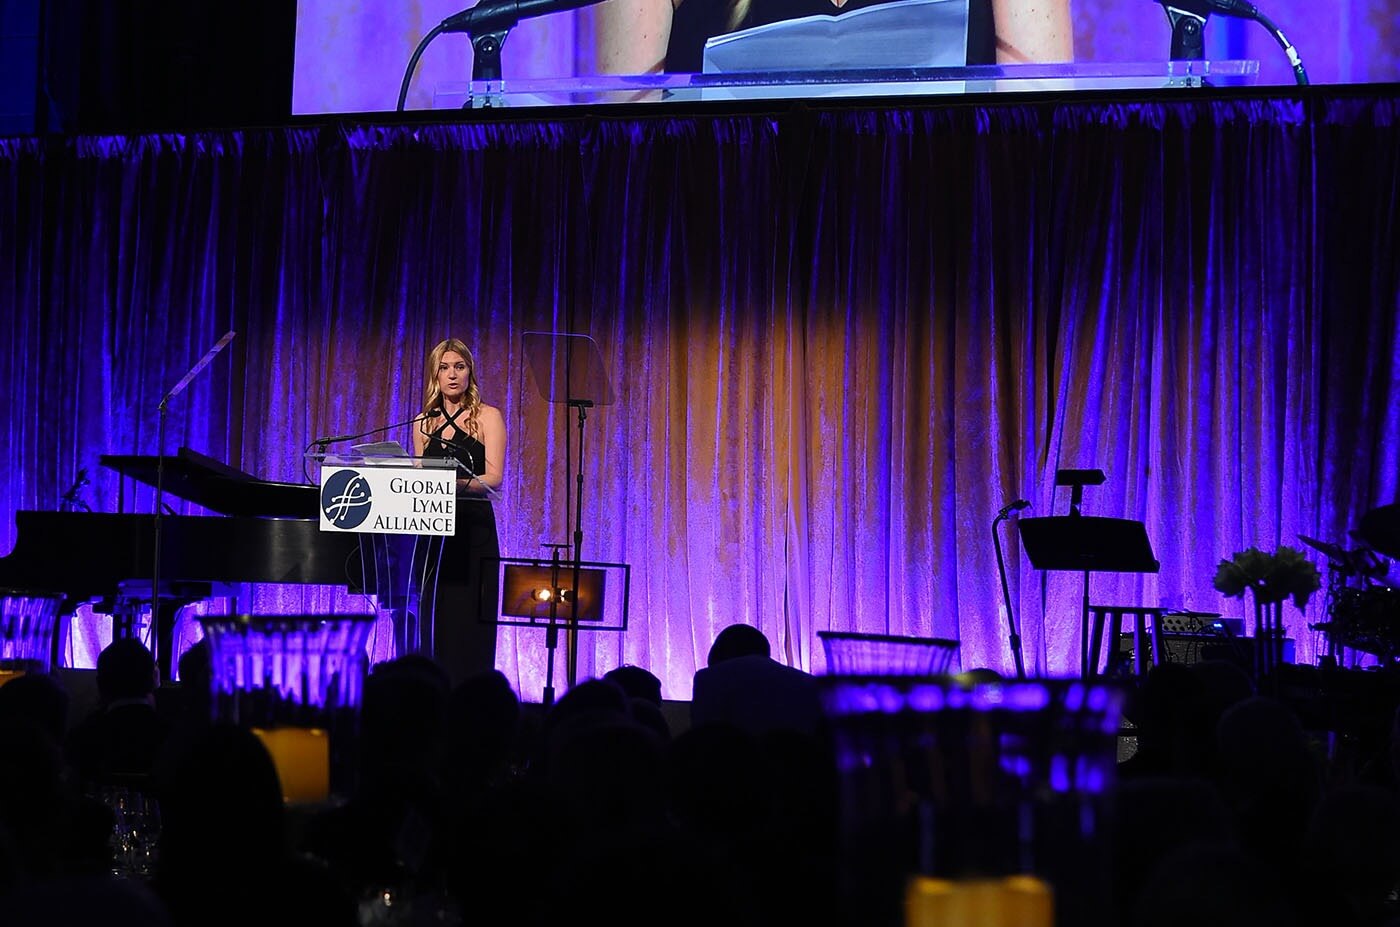 Adrienne Nolan-Smith, patient advocate, wellness speaker, wellness expert and the founder of WellBe speaking at the Global Lyme Alliance gala in New York City.